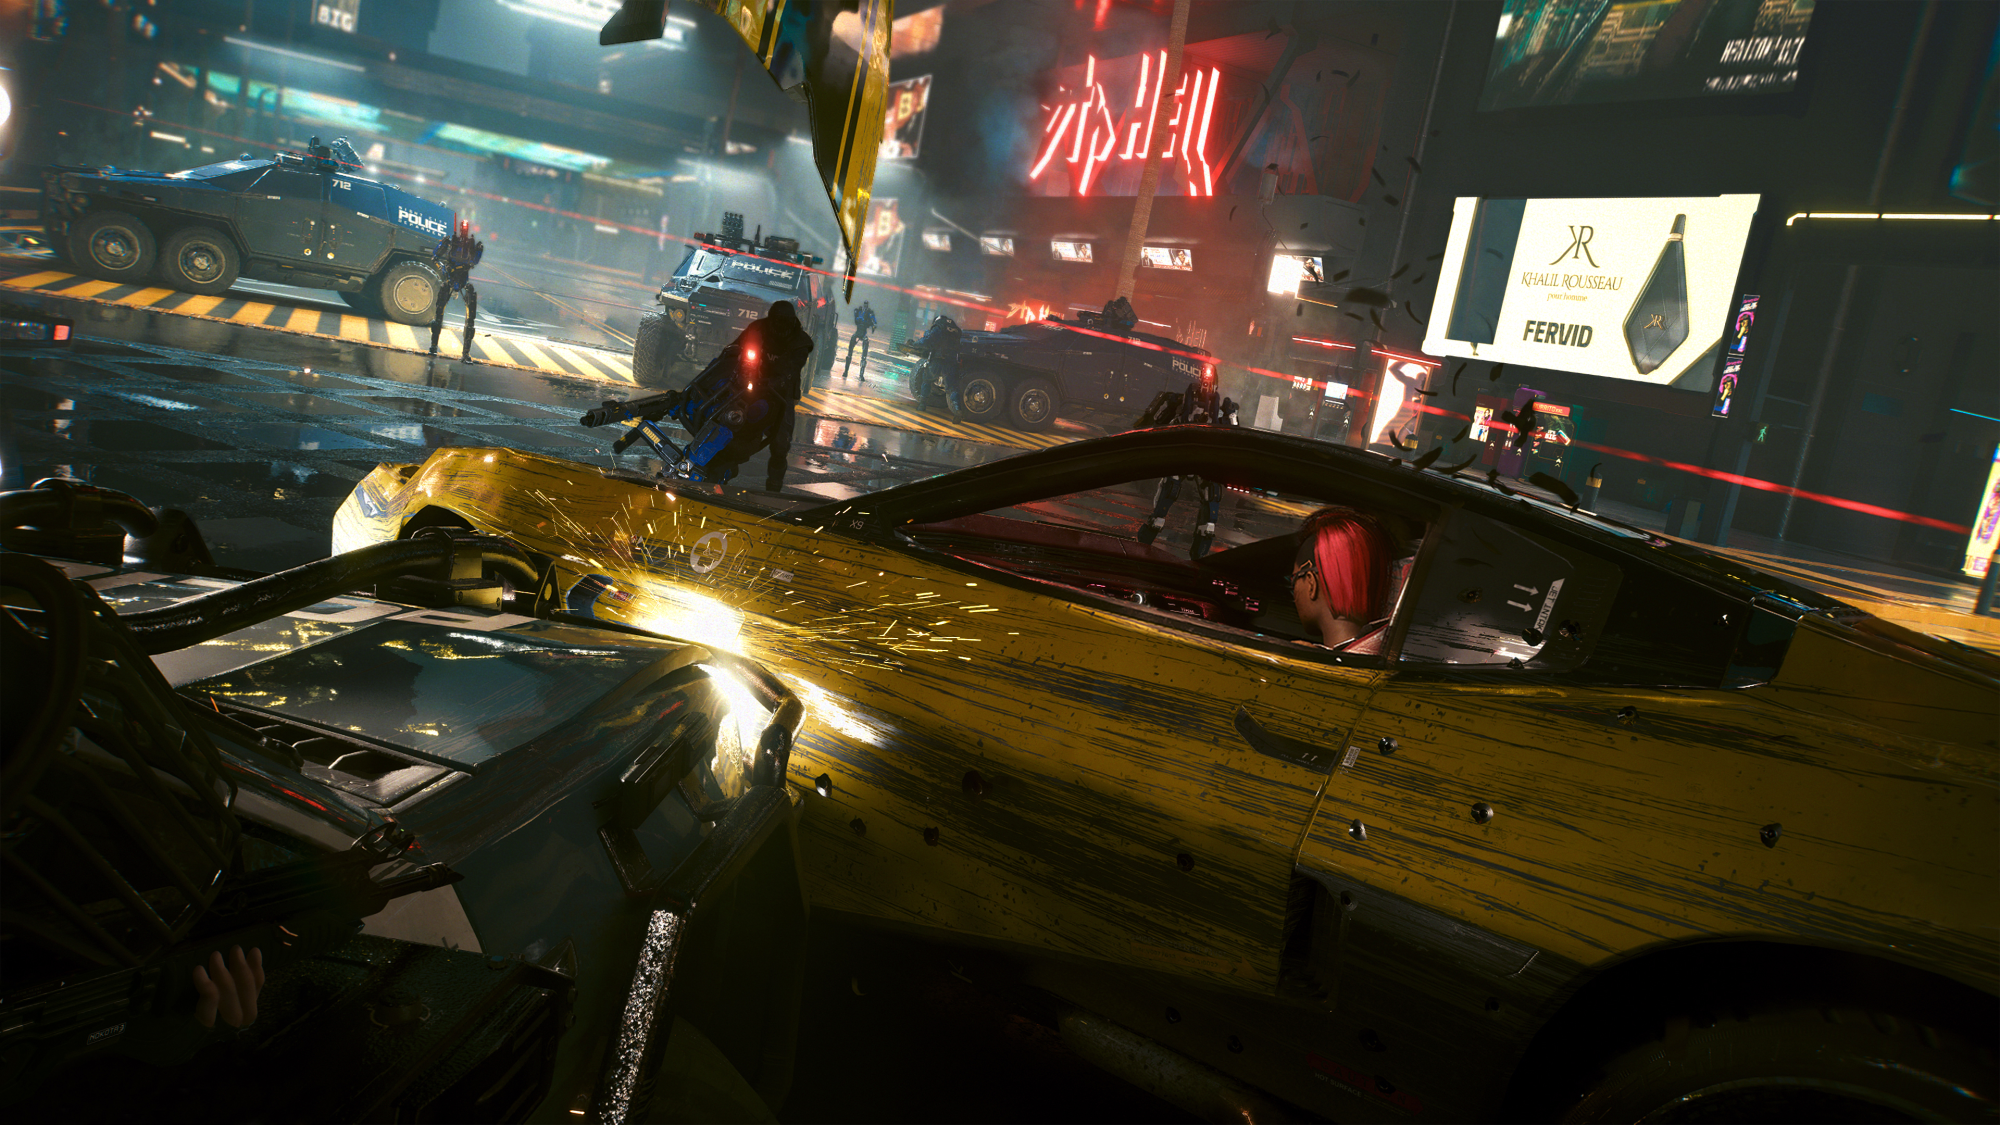 Cyberpunk 2077 Finds Redemption Years After Calamitous Debut - Bloomberg